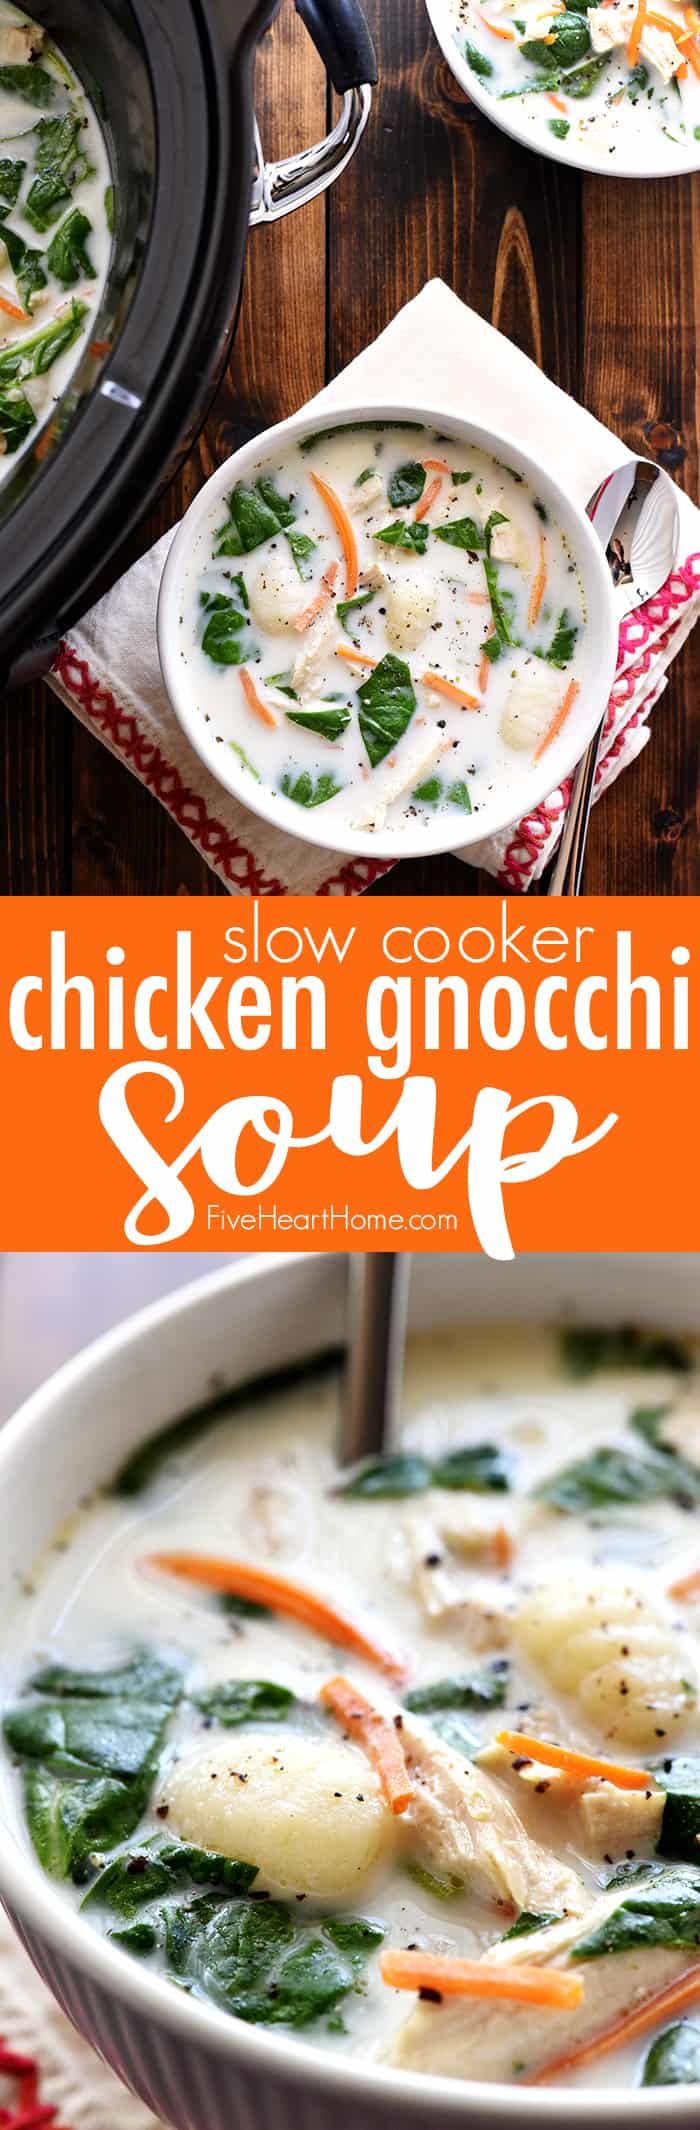 Slow Cooker Olive Garden Chicken Gnocchi Soup, two-photo collage with text.